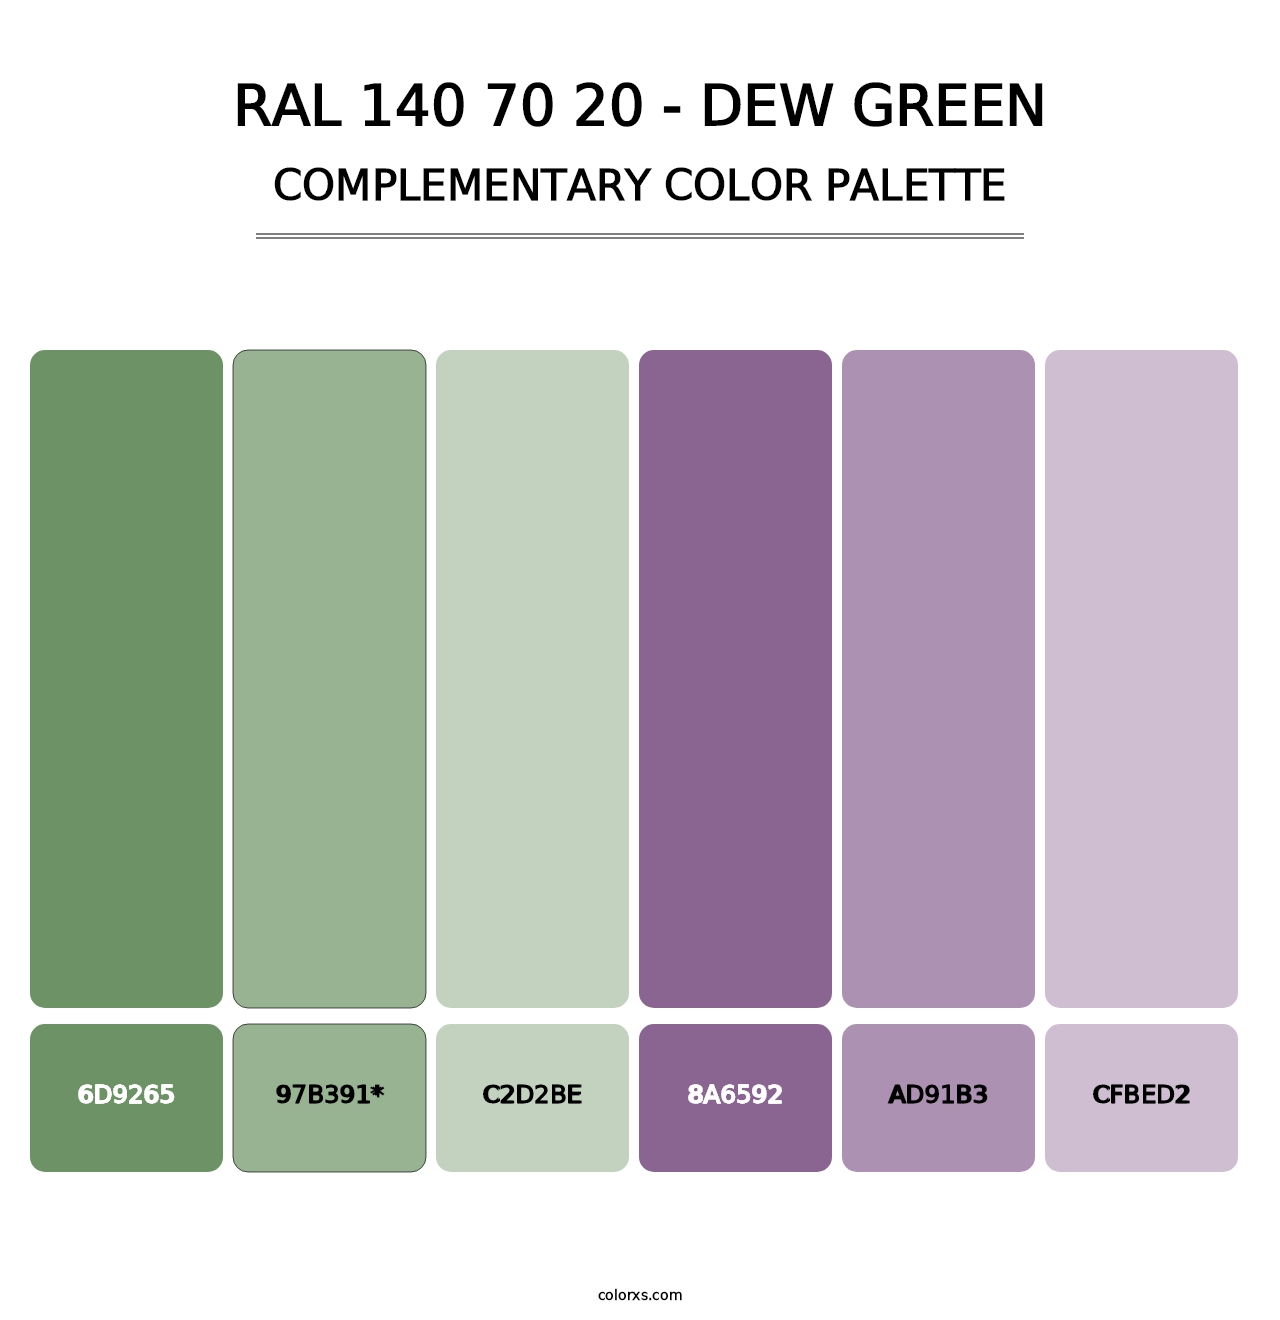 RAL 140 70 20 - Dew Green - Complementary Color Palette